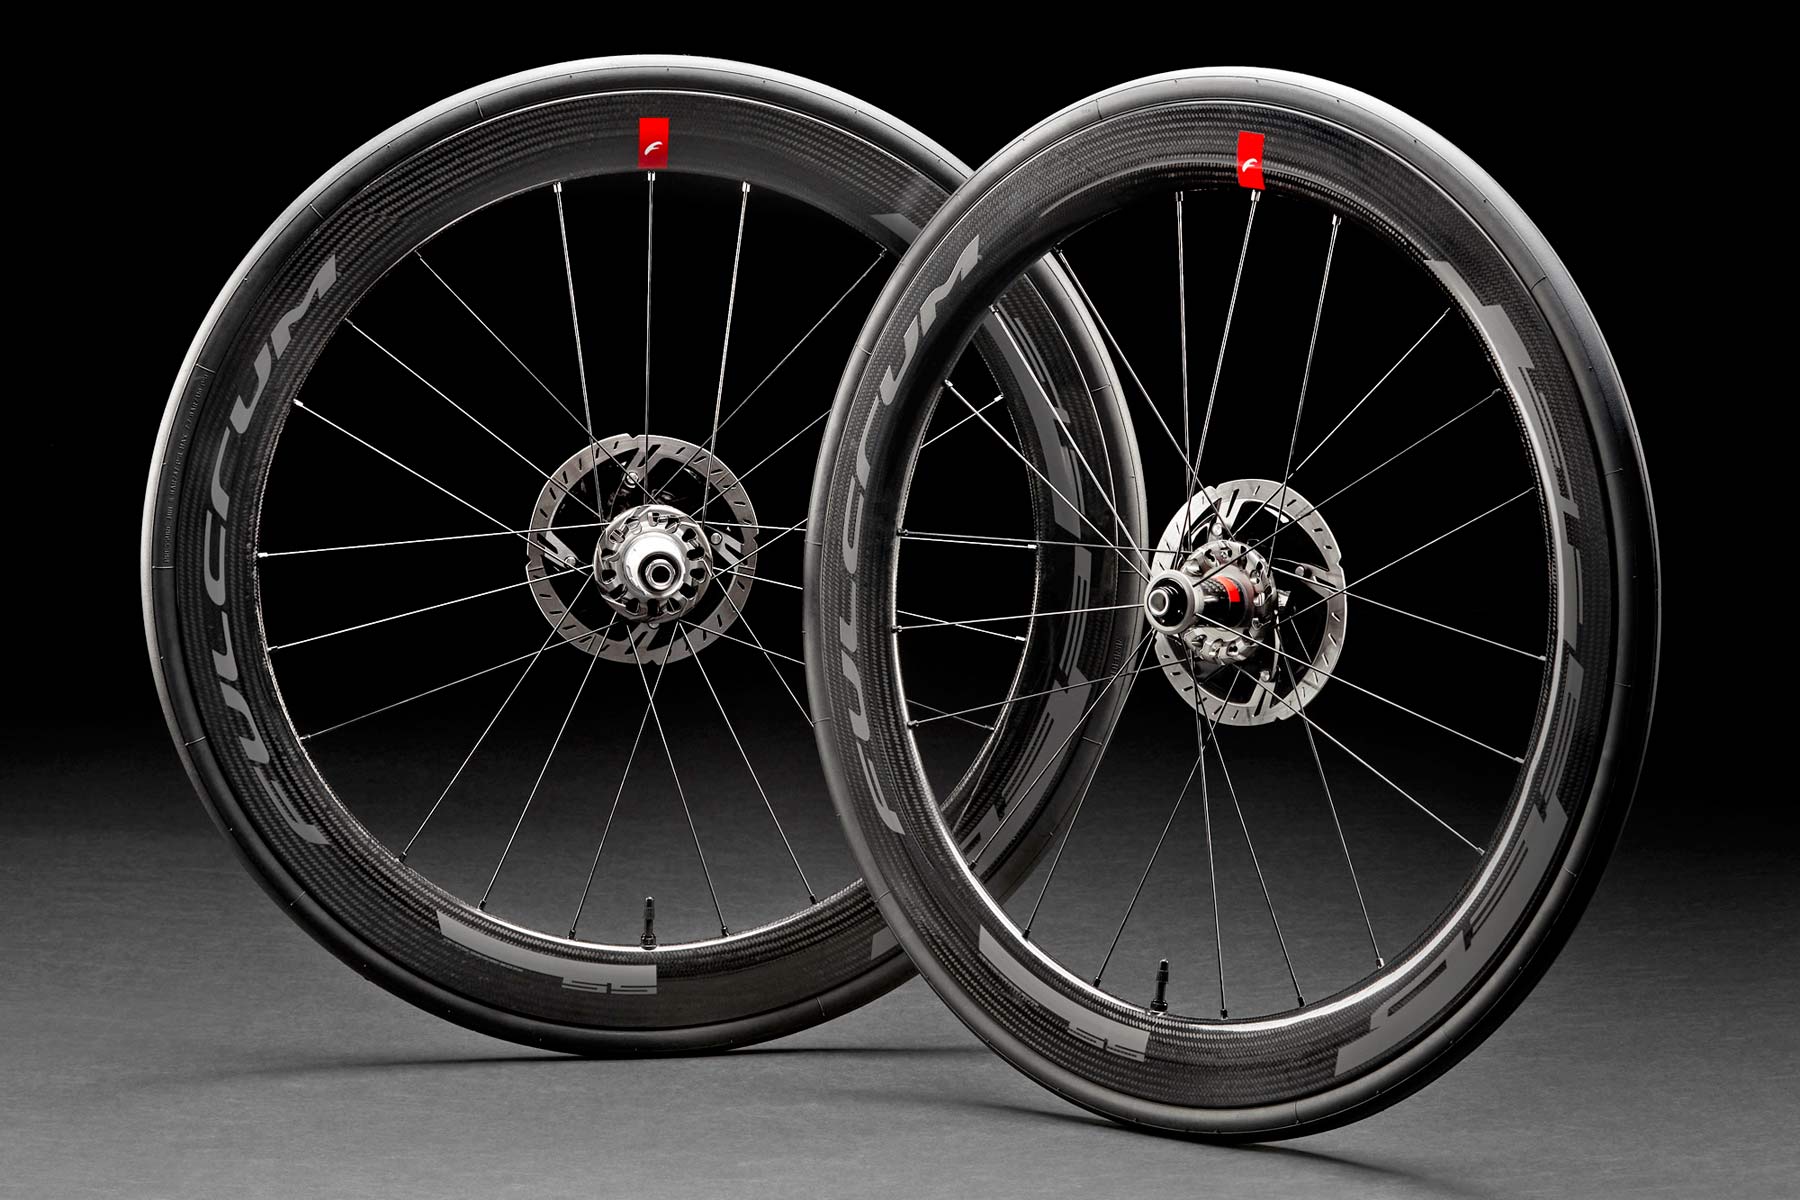 Fulcrum Speed 55 DB mixes aero, tubeless & discs in fast new 